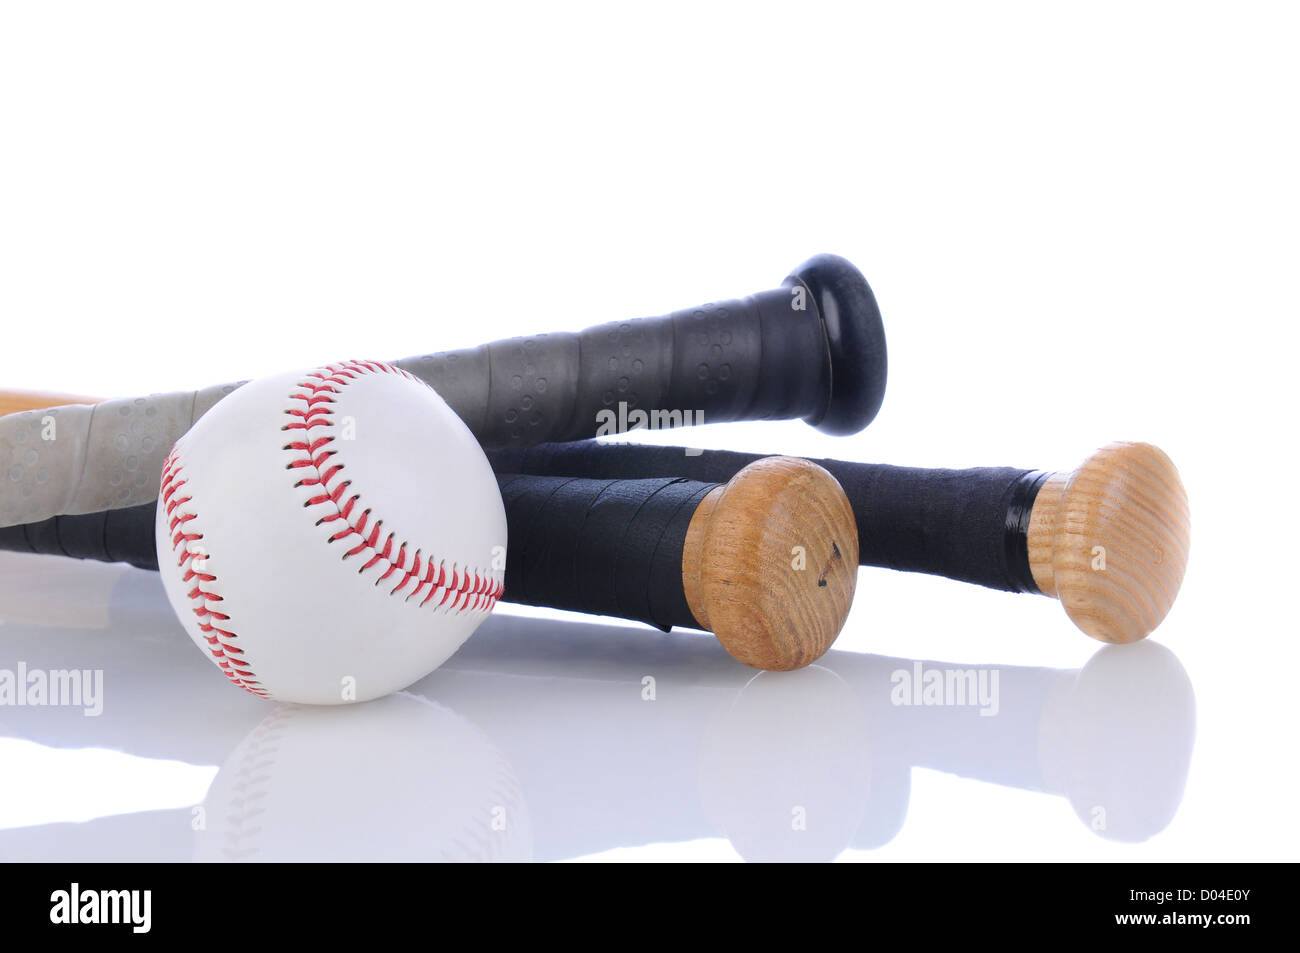 Closeup of a baseball and three bats on a white background with reflection, horizontal format. Stock Photo